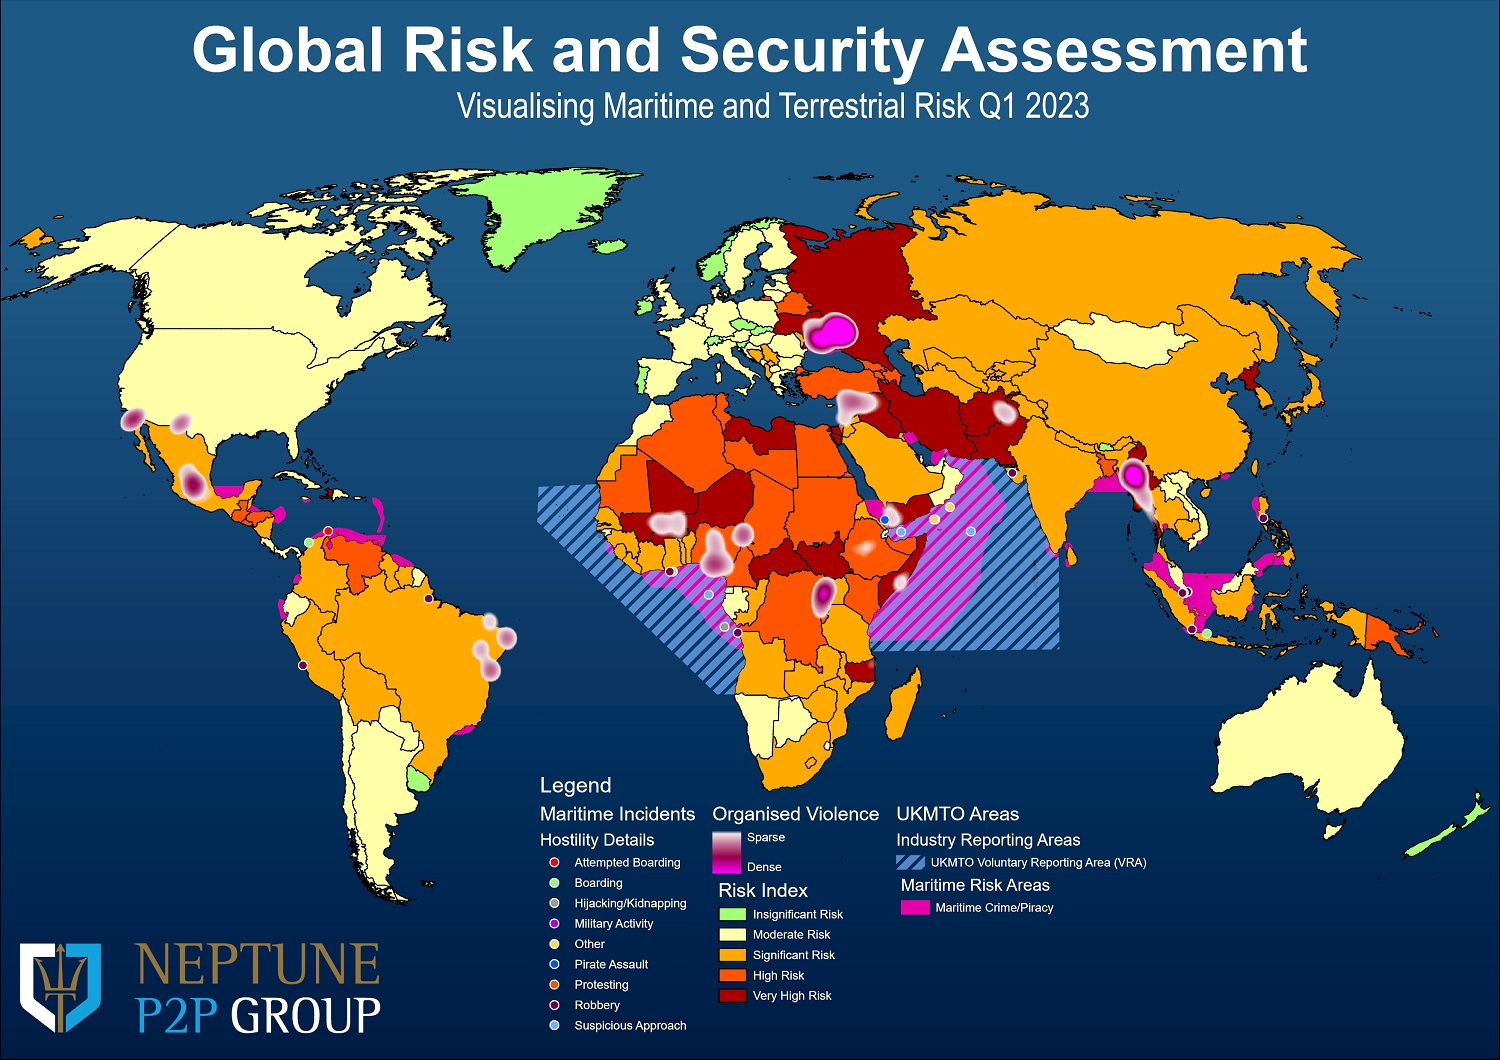 Neptune P2P Group - Global Risk Map Q1 2023 - Copy